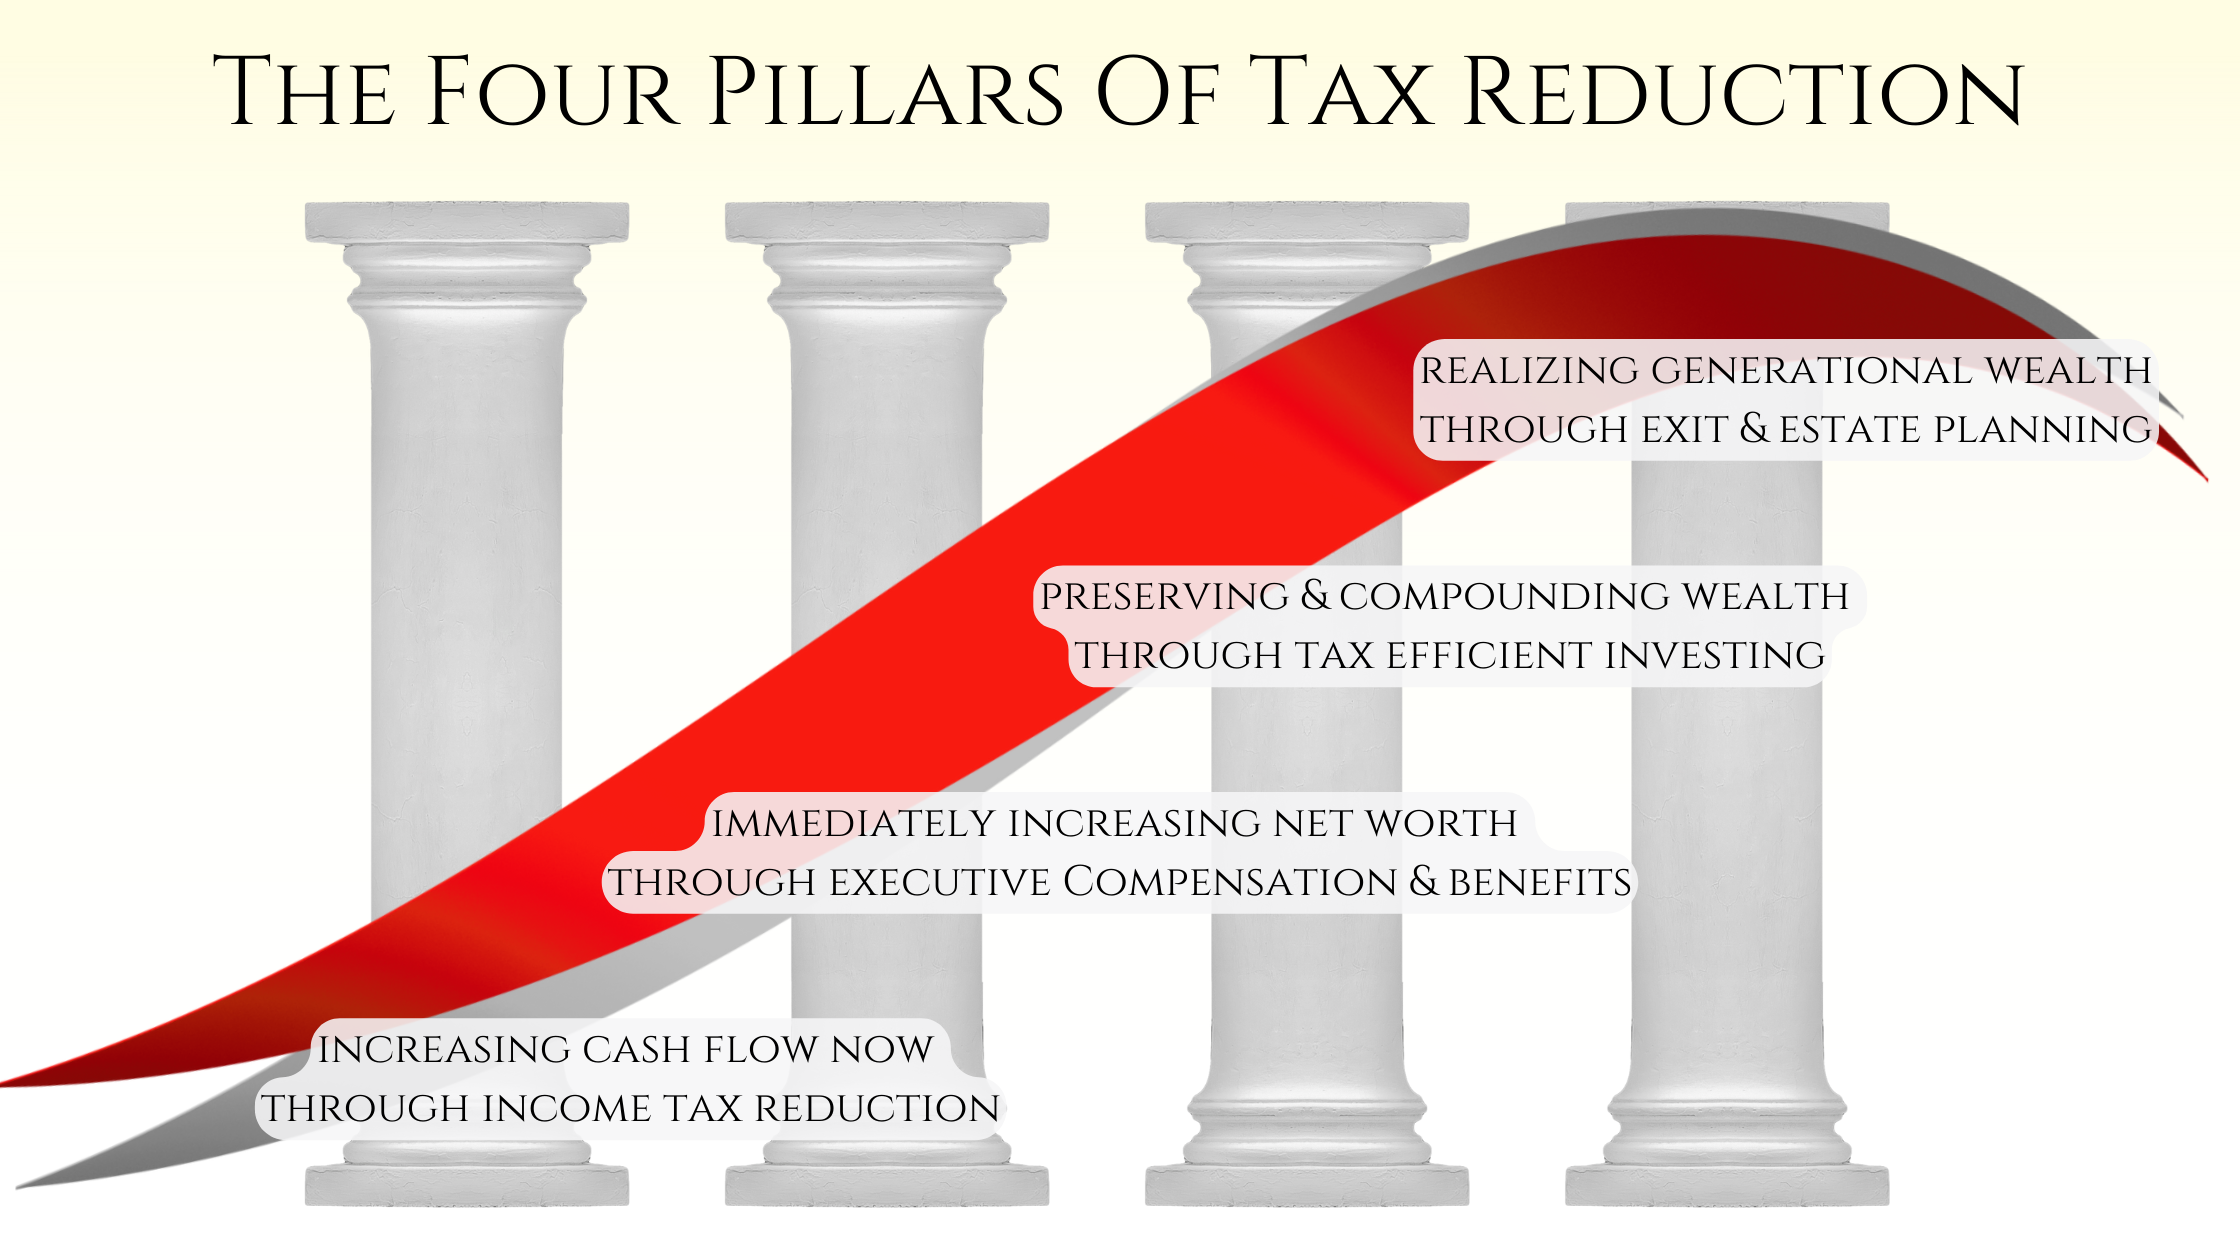 The Four Pillars Of Tax Reduction: What Arnold Palmer Can Teach Us About Taxes